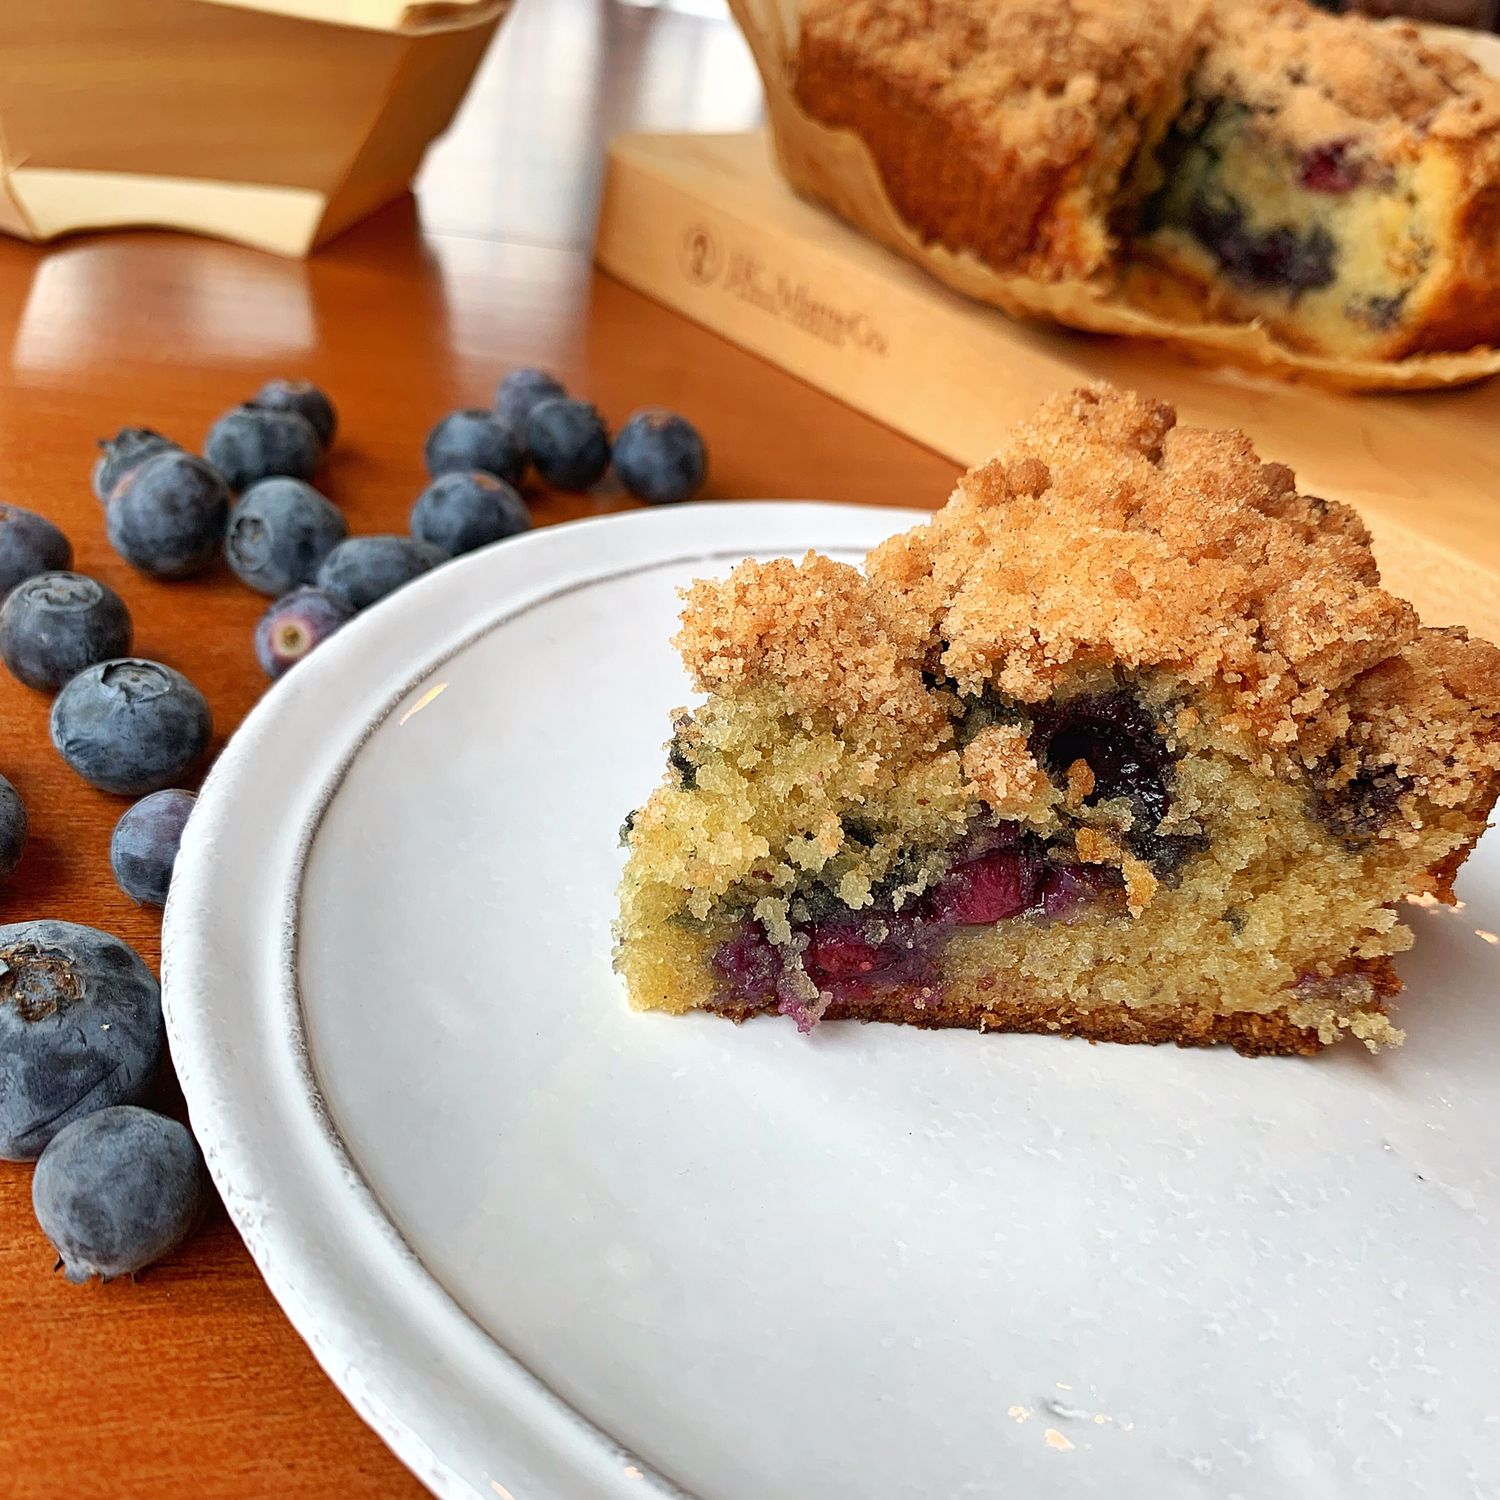 MDAY24 coffee cake: BLUEBERRY BAKE-AT-HOME